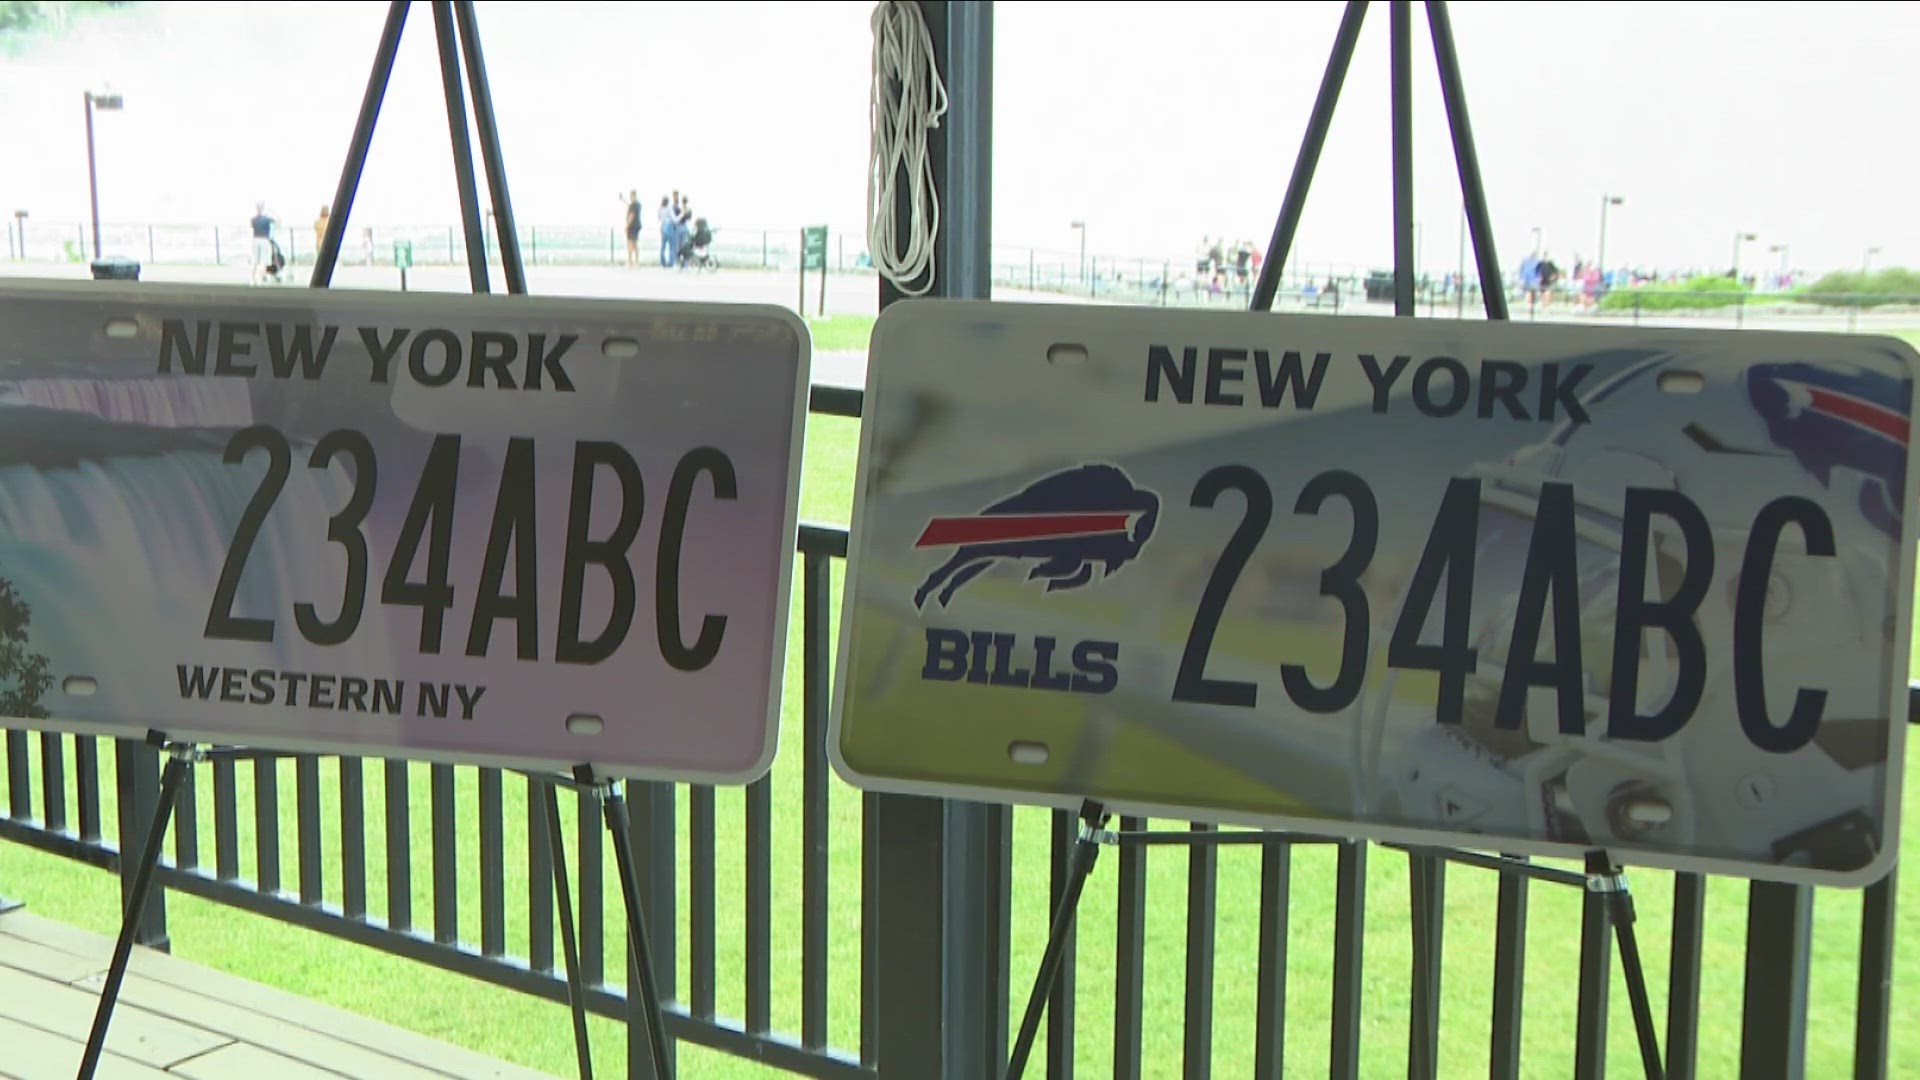 There's a new regional plate highlighting the falls.
And a newly re-designed Buffalo Bills plate.